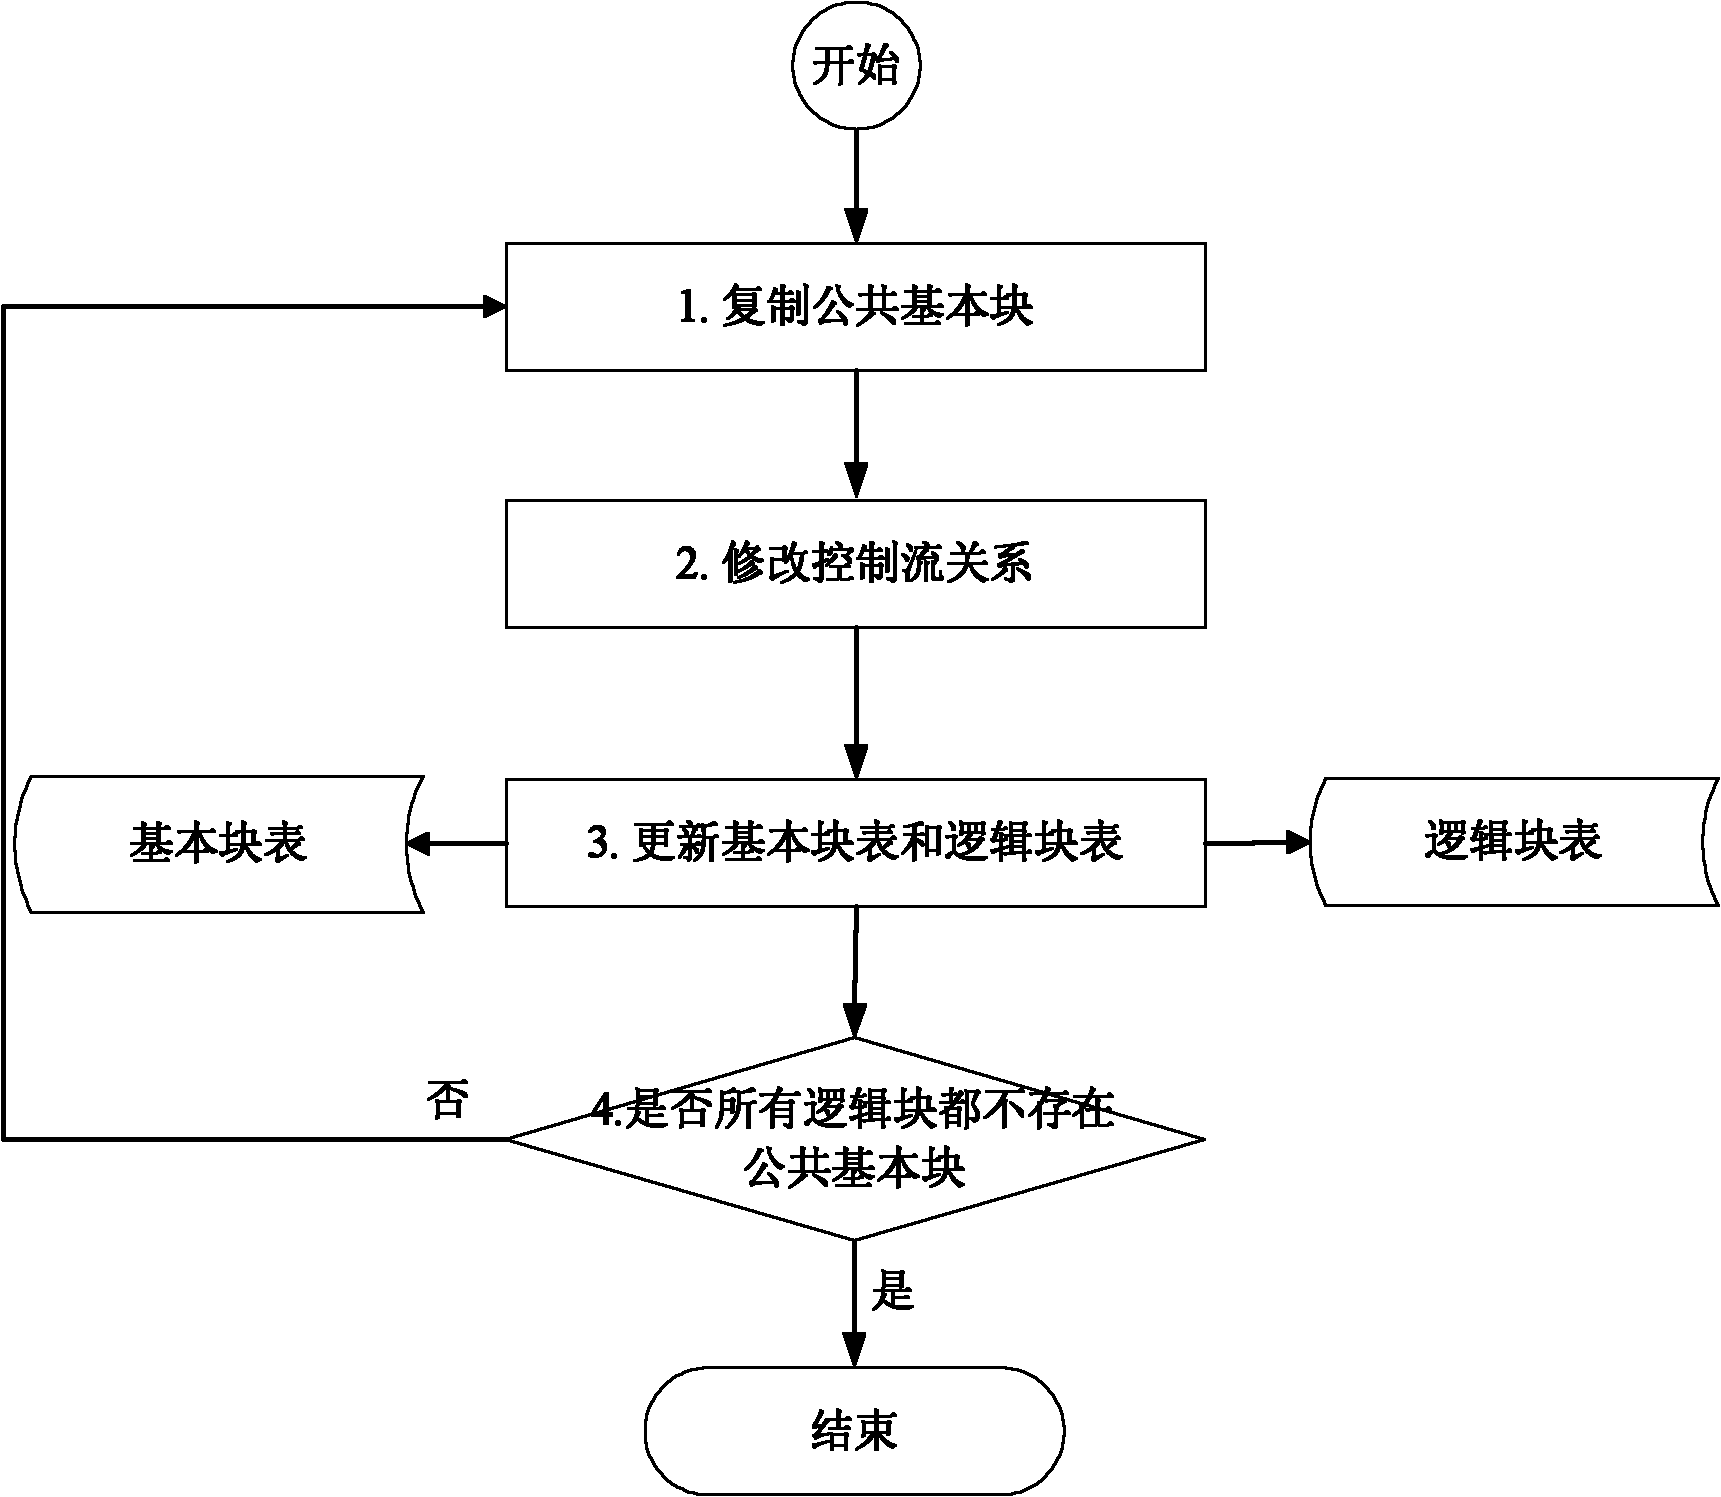 Control flow error detection optimizing method based on reconstructed control flow graph